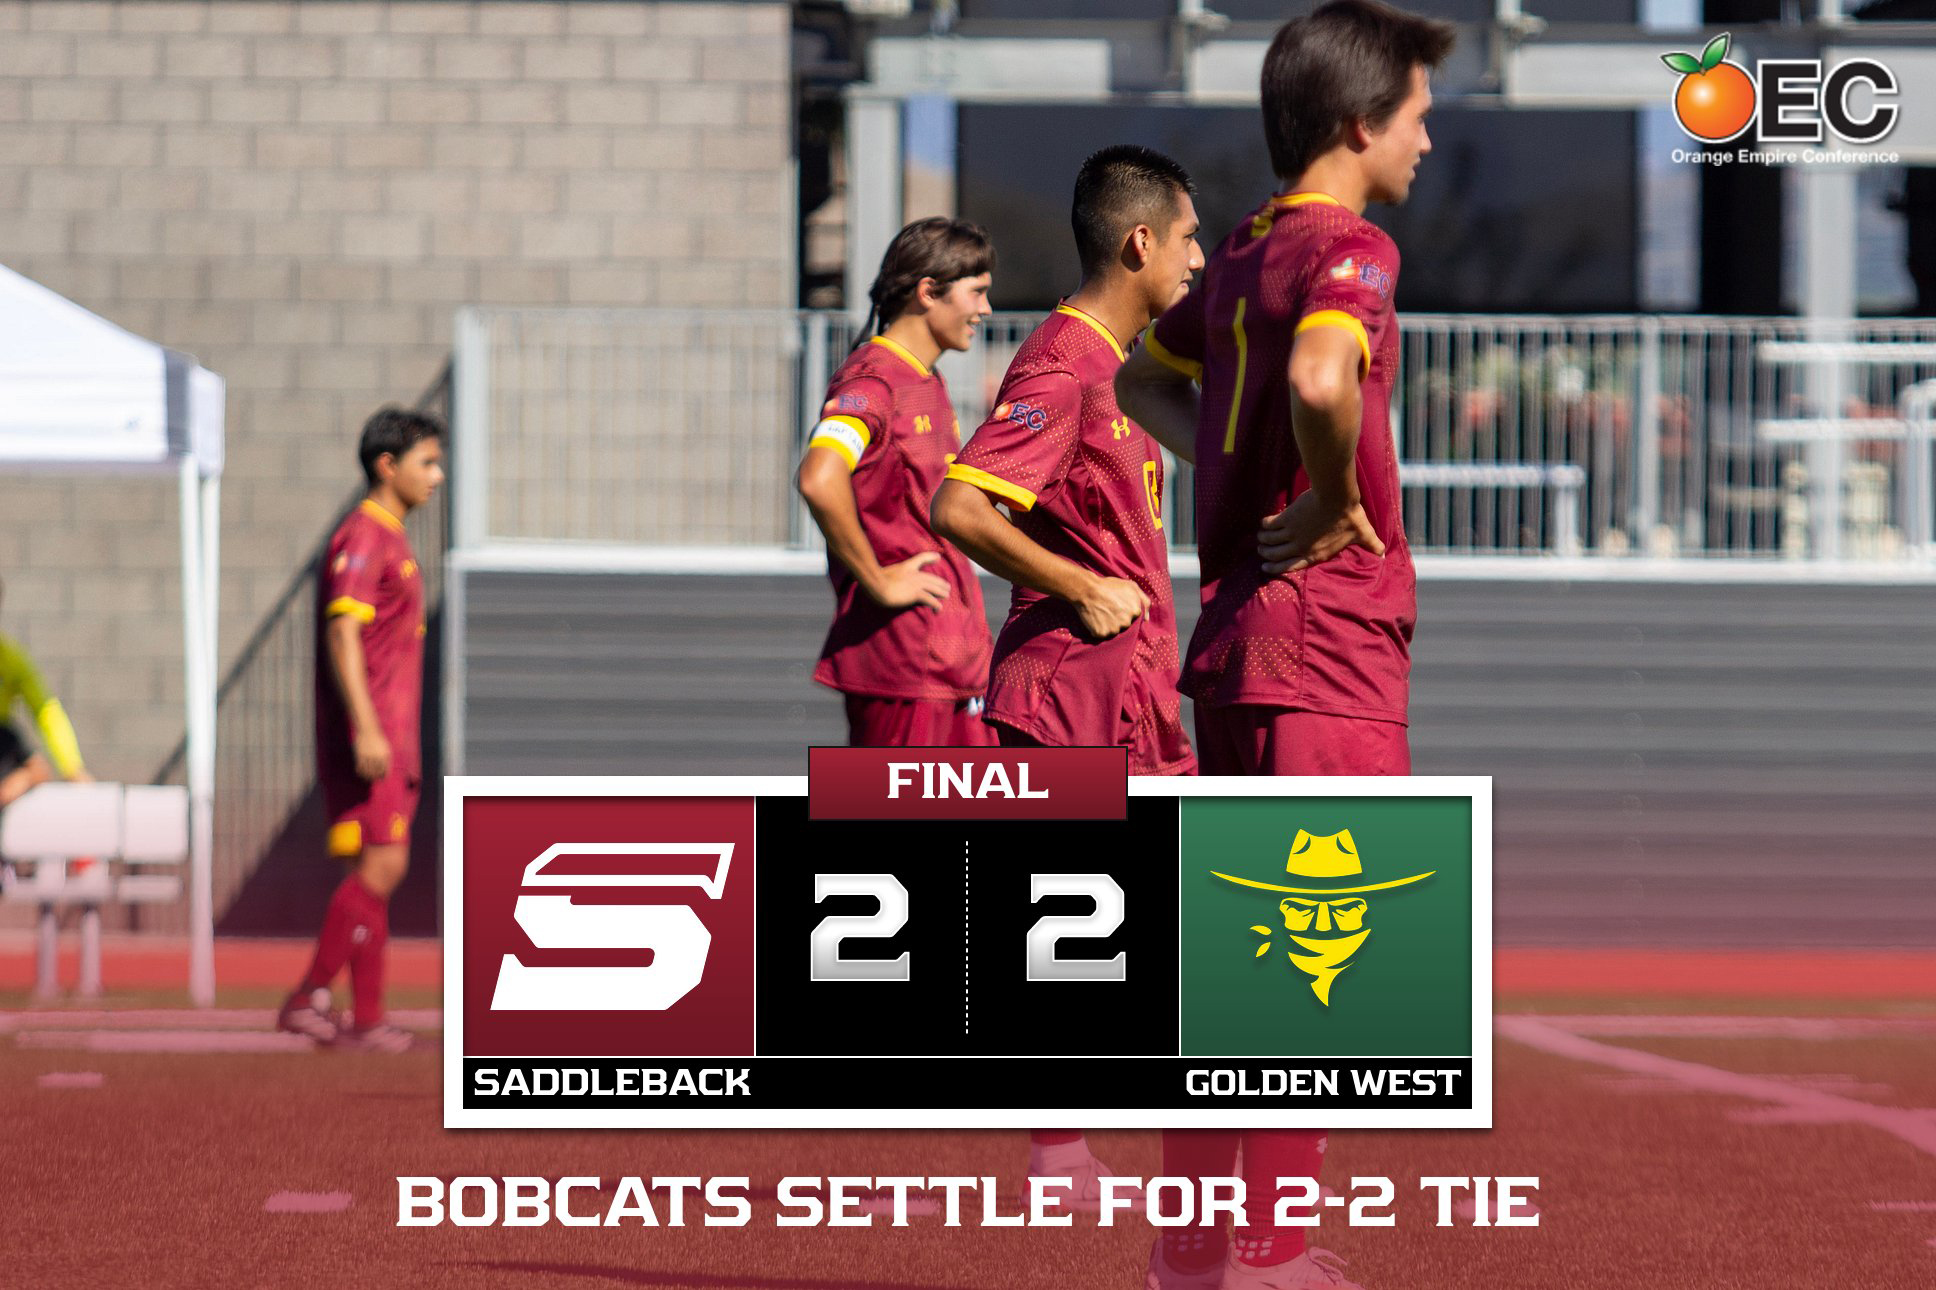 Bobcats settle for a tie